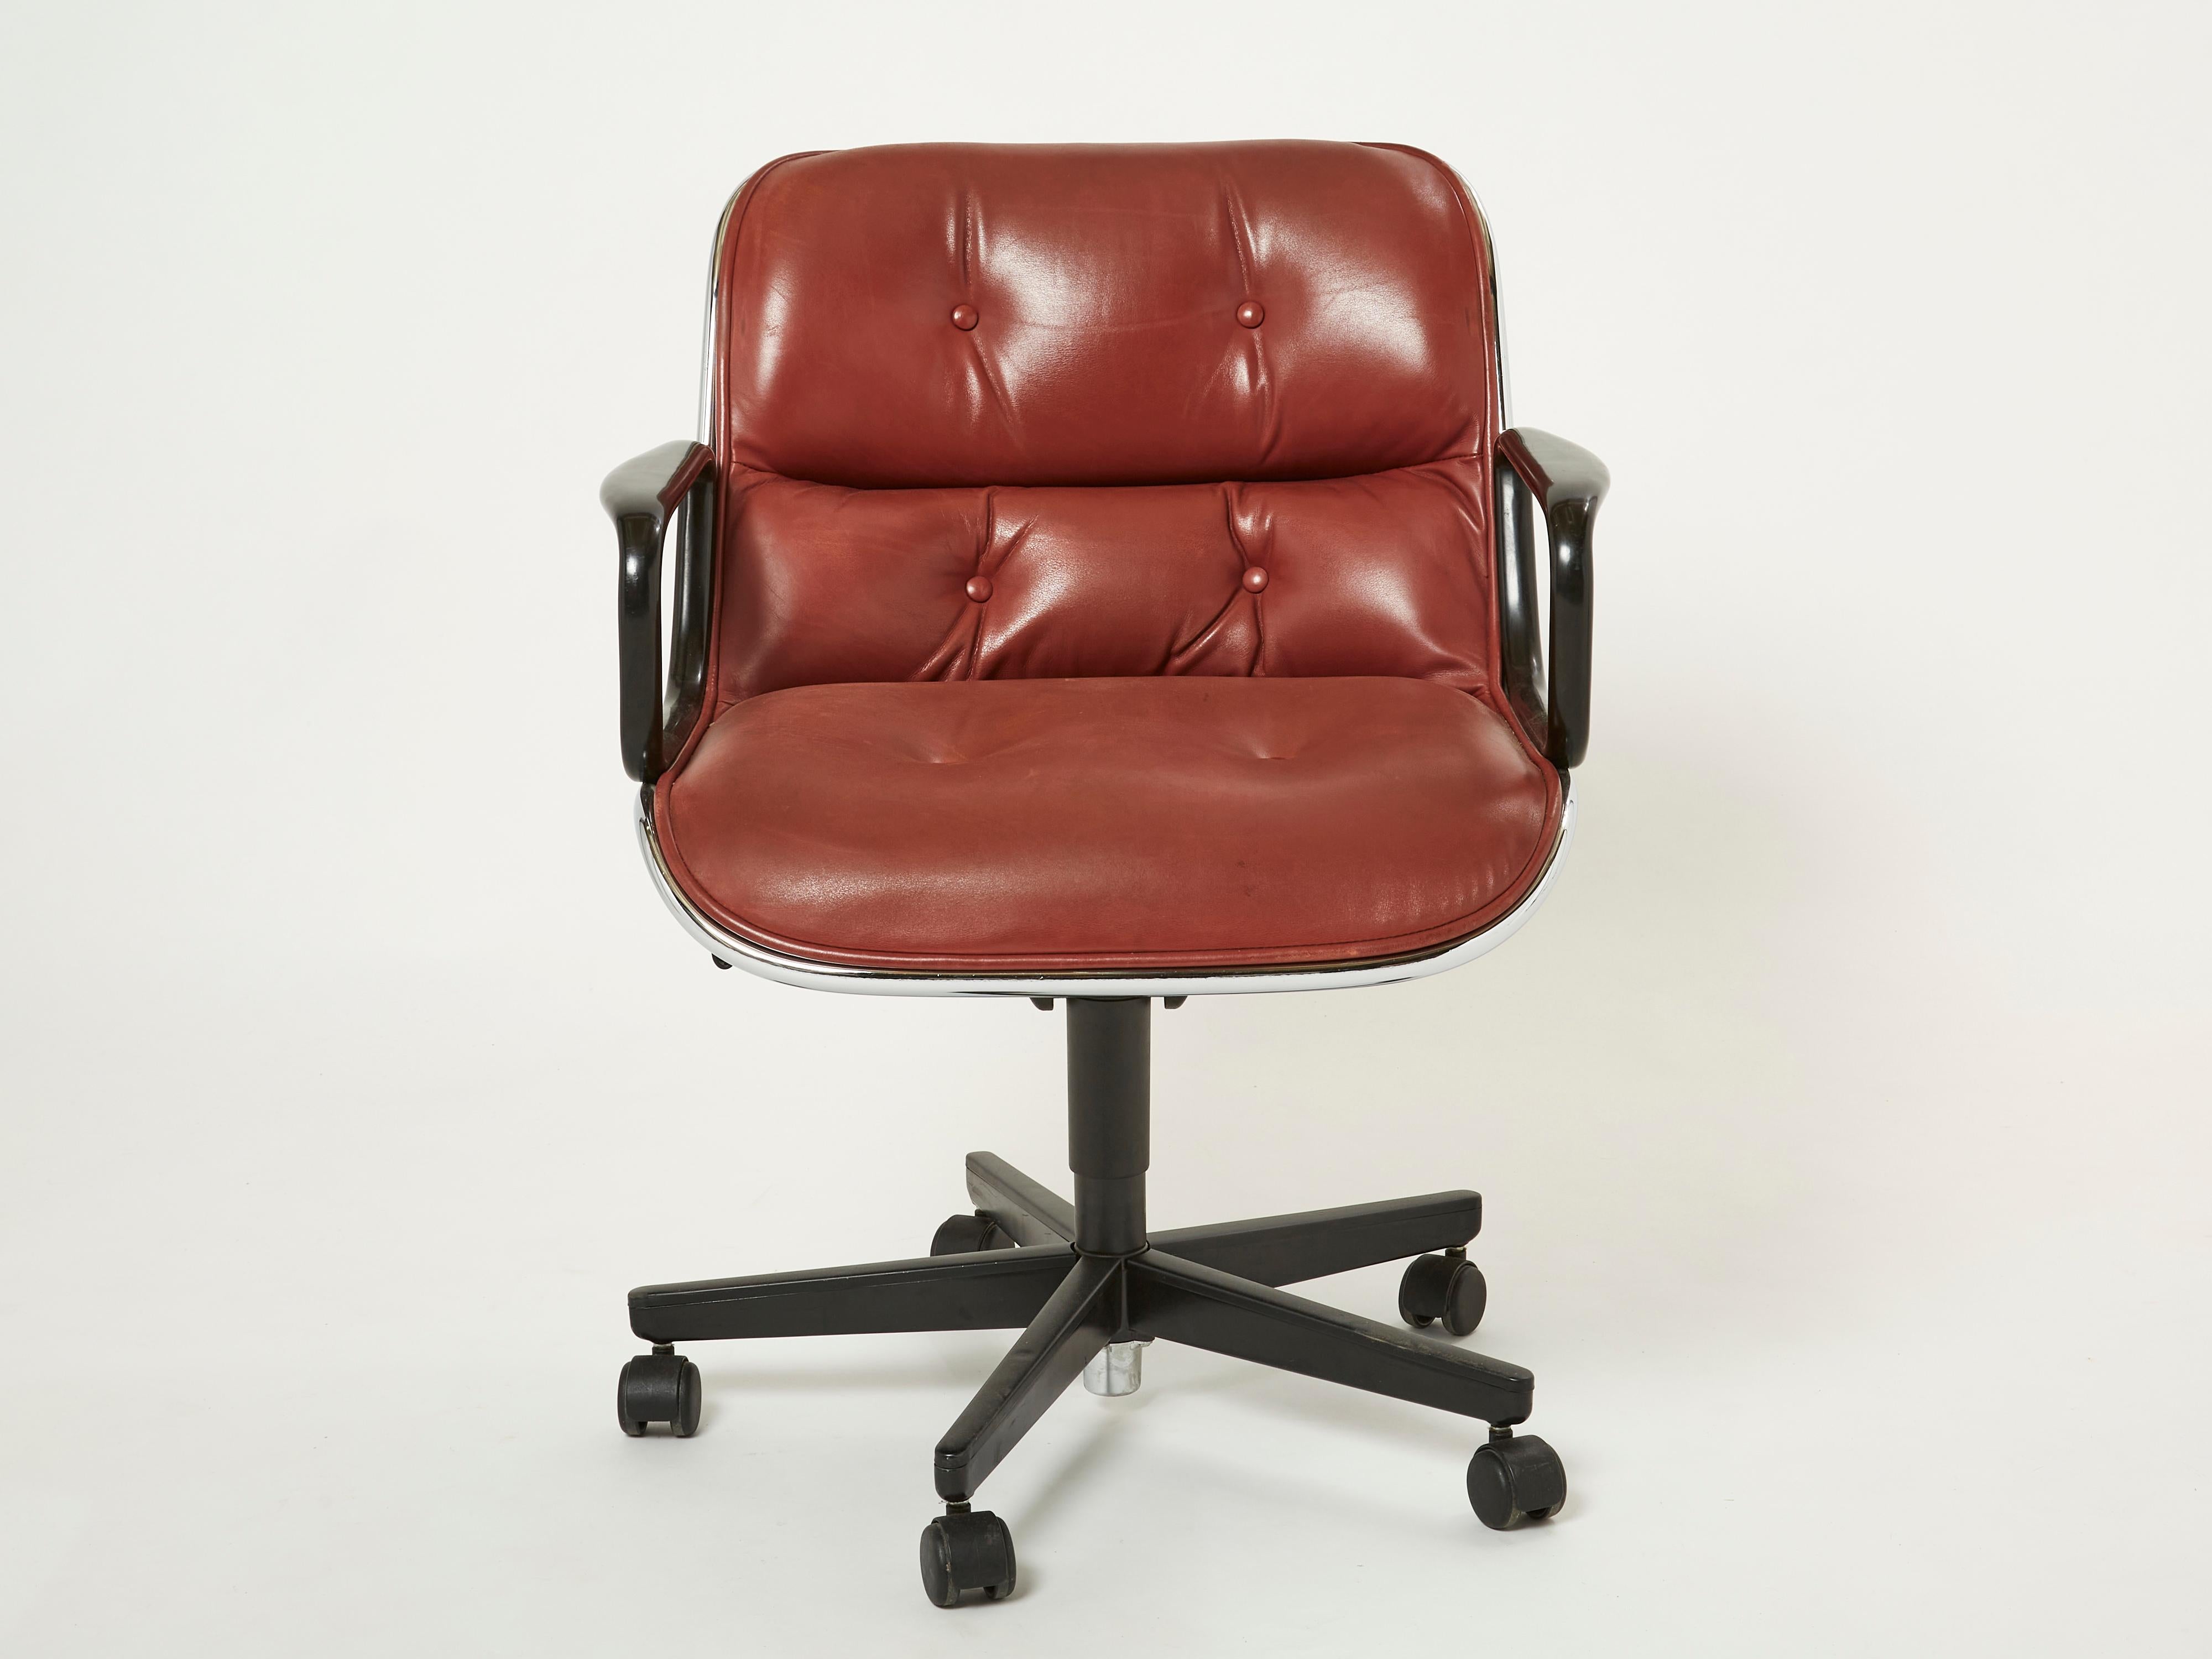 Beautiful Executive armchair by Charles Pollock for Knoll from the 1990s. This office chair features a cognac brown leather seat and back with button detail, chrome shaft, black plastic arms, and a 5 stainless base with black casters. This chair is